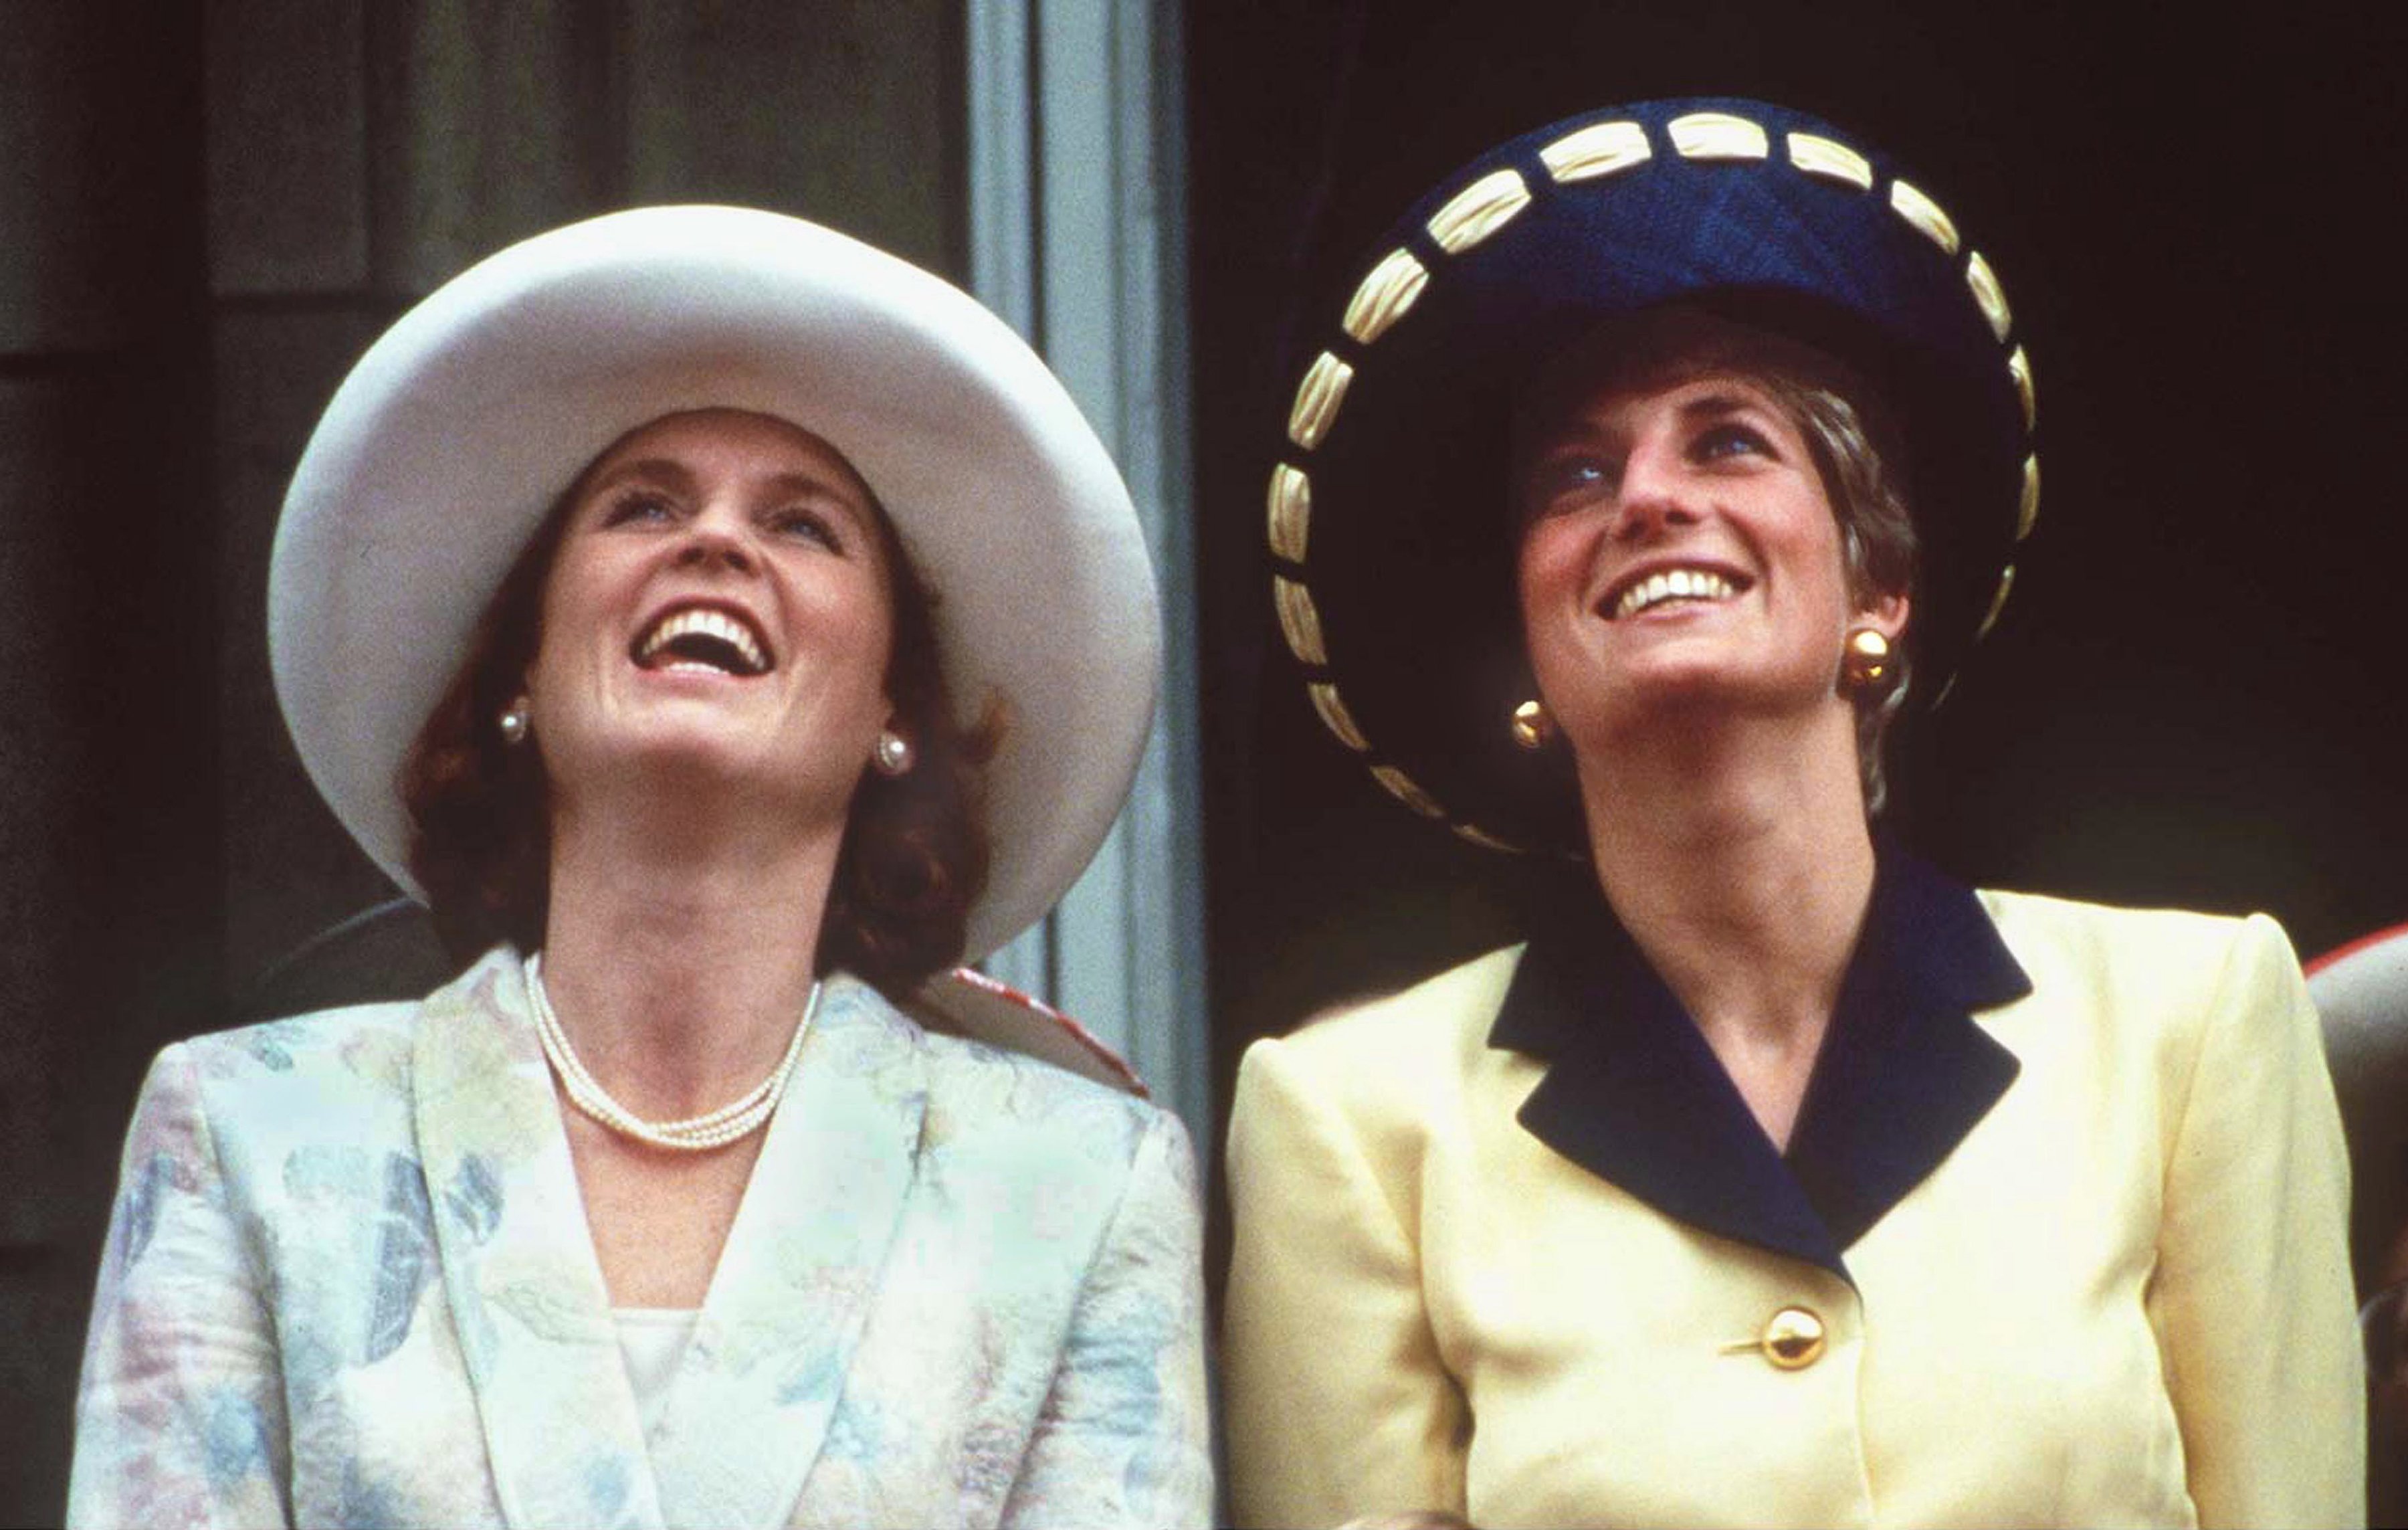 The Princess of Wales and the Duchess of York on the balcony of Buckingham Palace during the Trooping the Color ceremony in June 1991. / Source: Getty Images